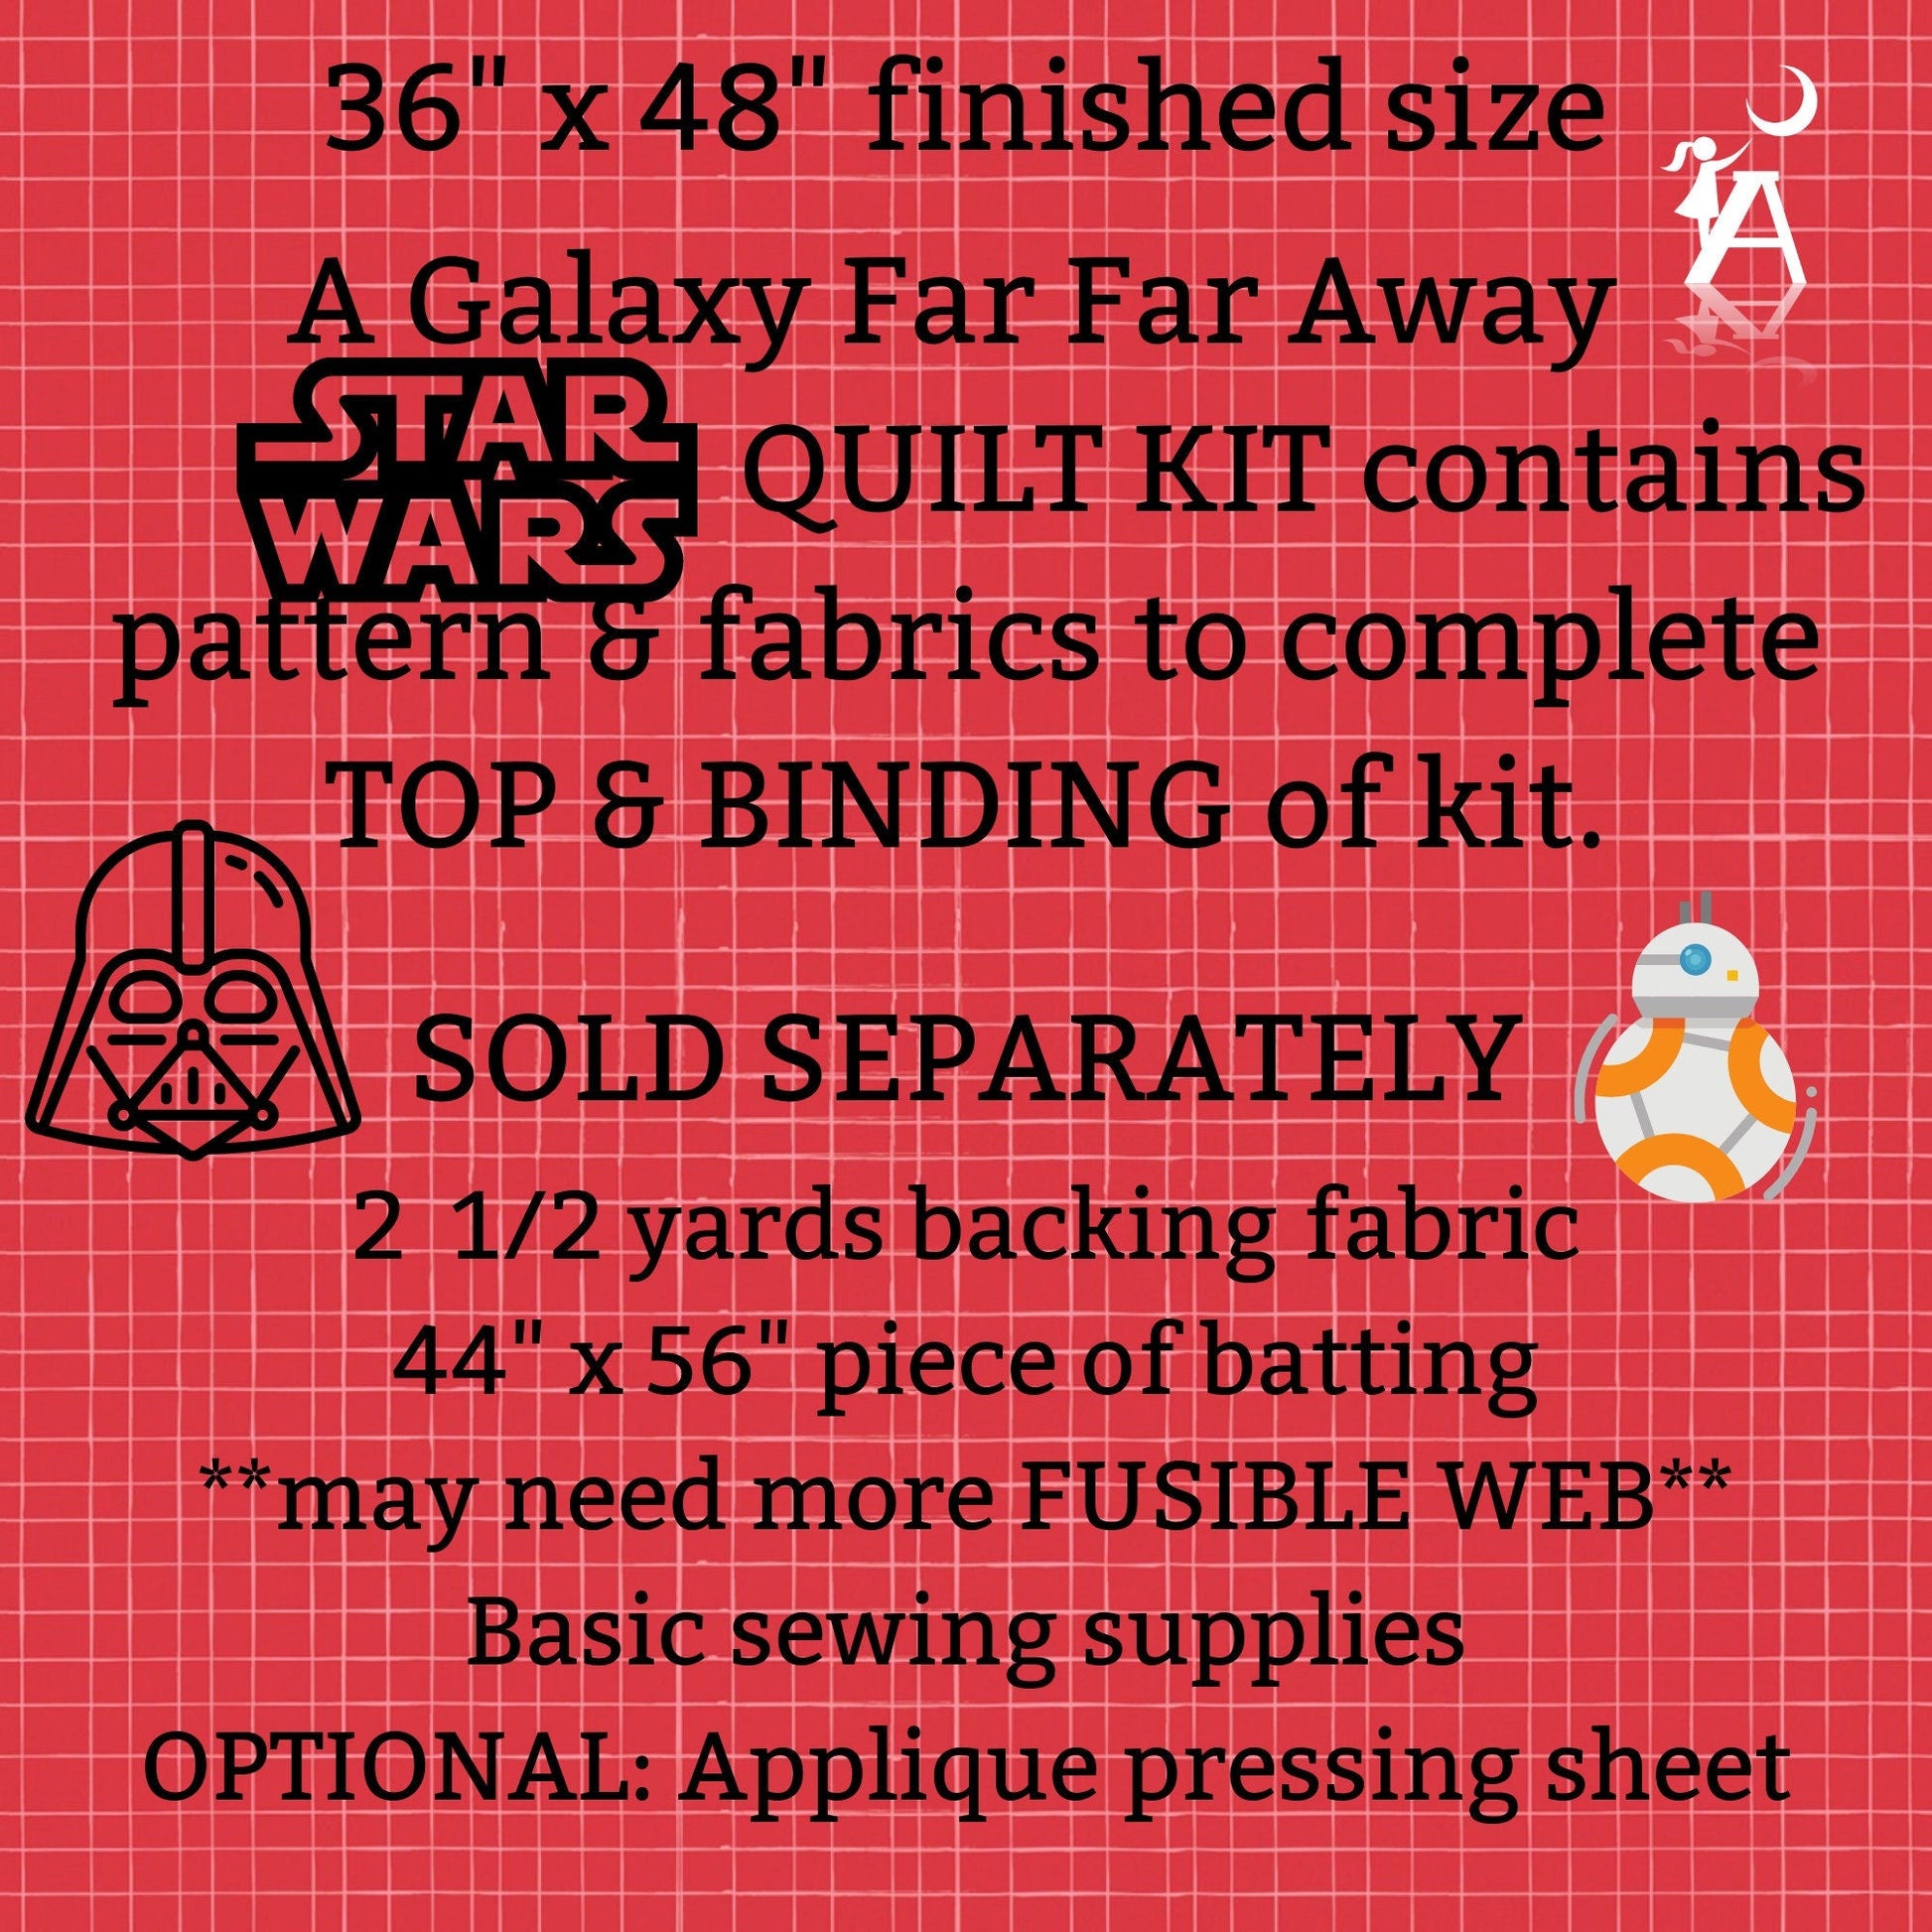 Whimsical Workshop Quilt Patterns Galaxy Far Far Away DIY Star Wars Applique COMPLETE Intermediate Quilt Kit with Millennium Falcon and Star Destroyer Pattern Video Tutorial available